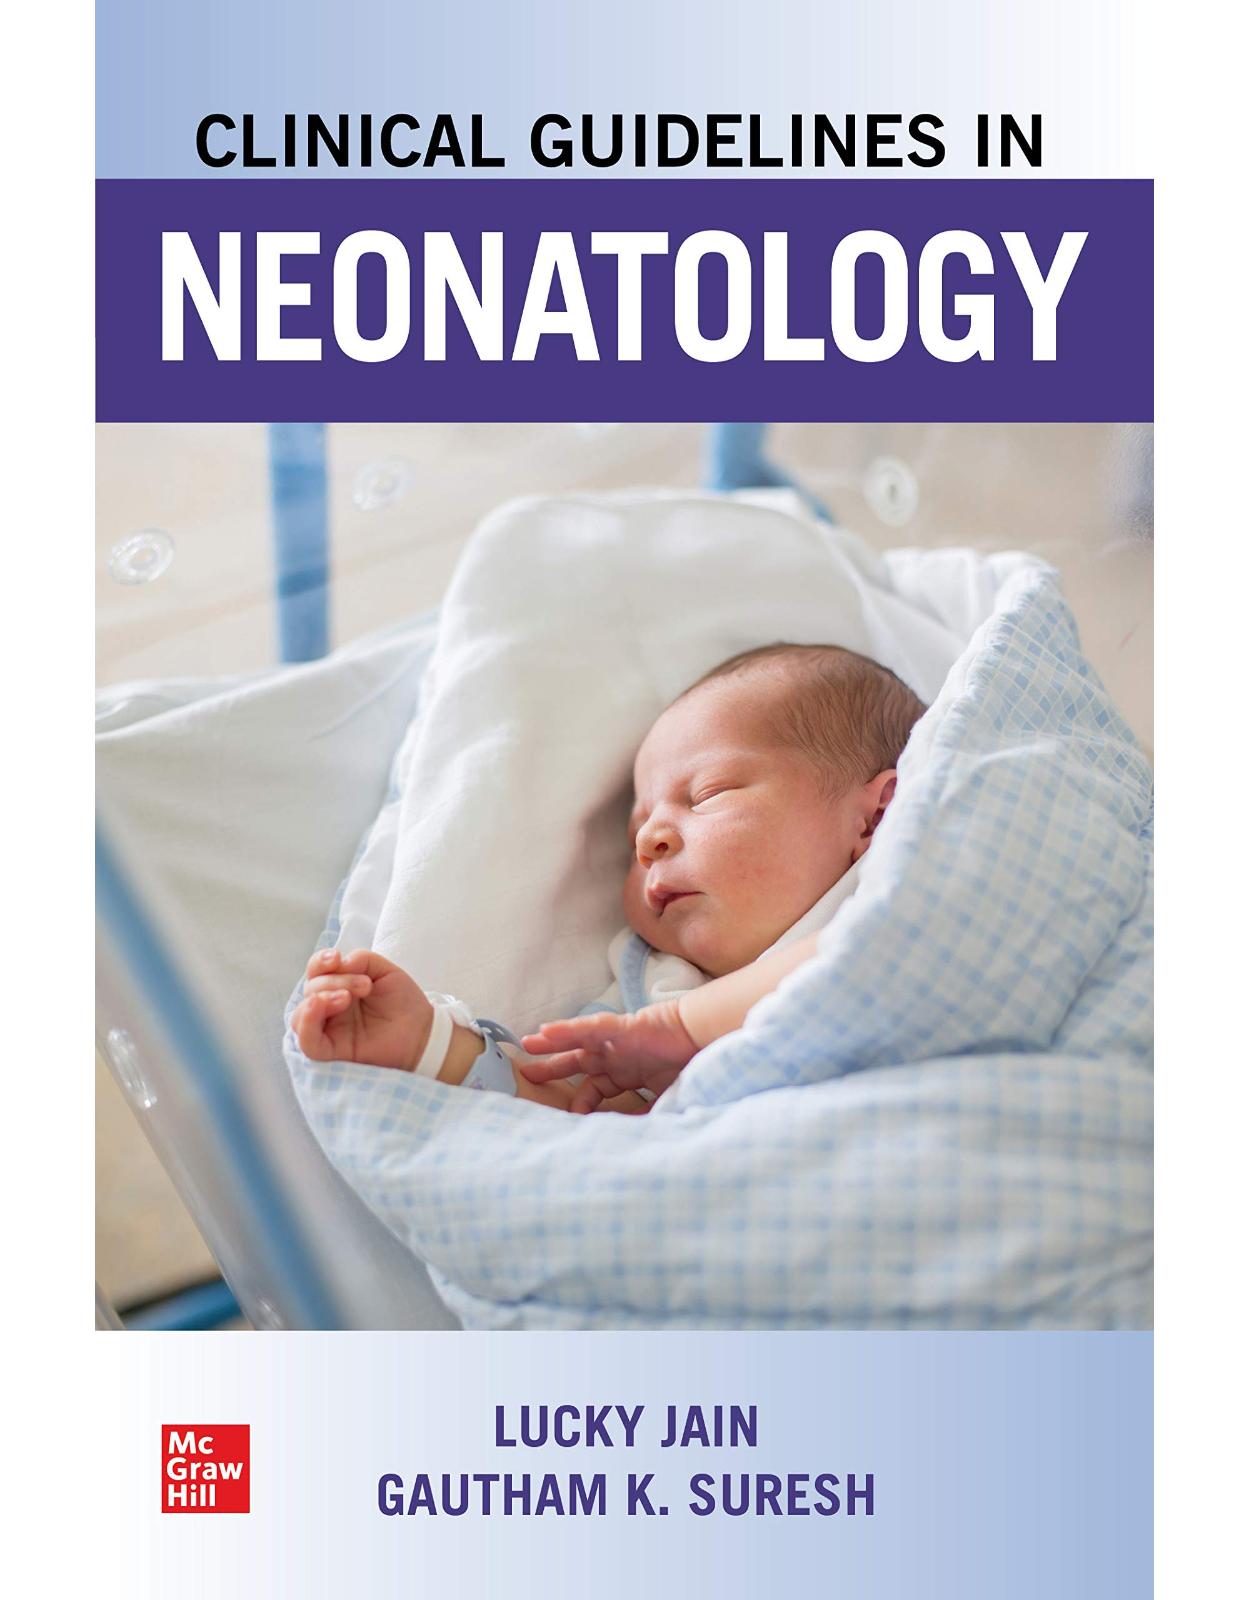 Clinical Guidelines in Neonatology